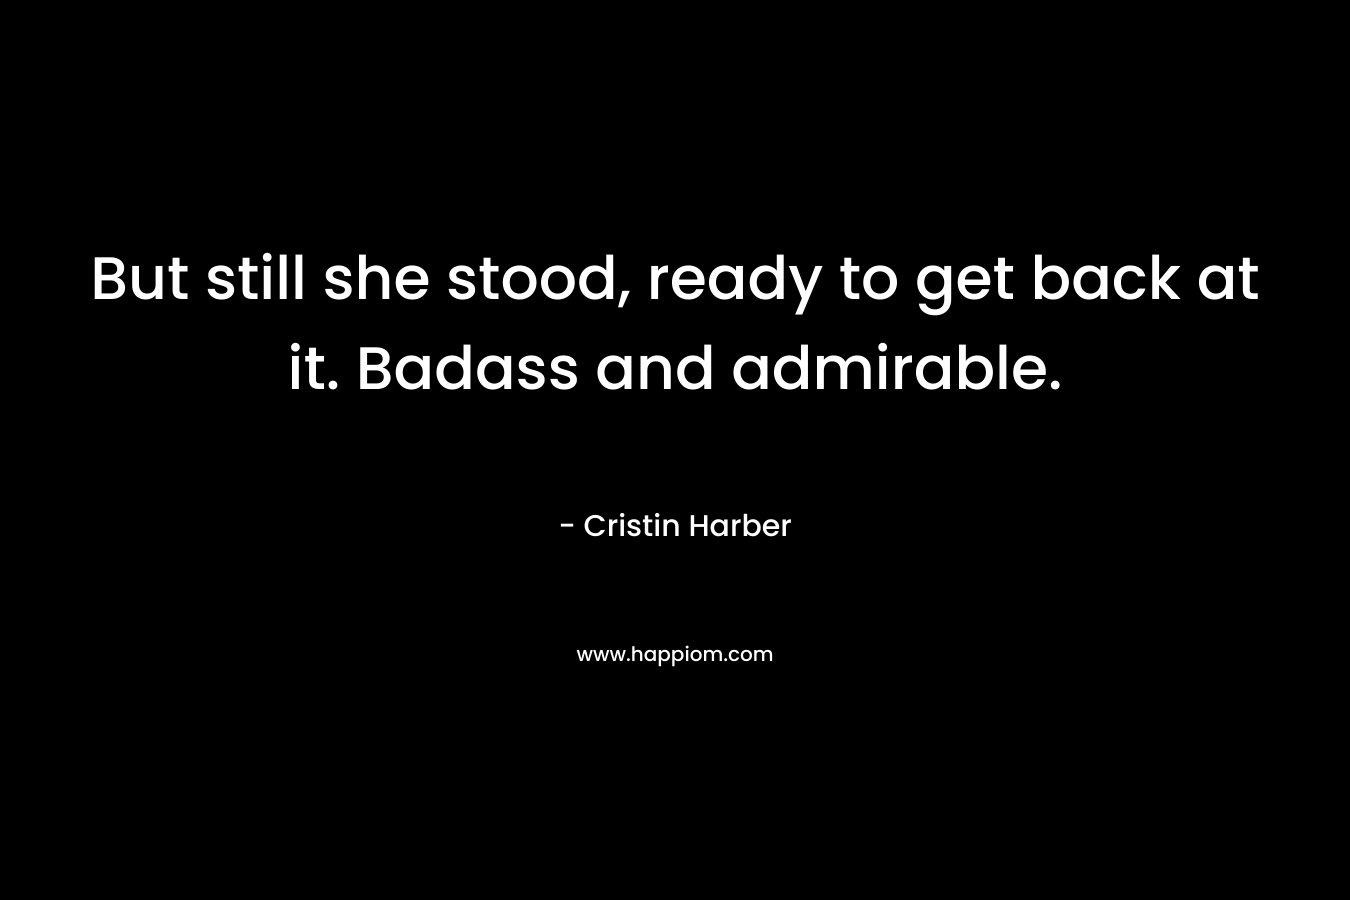 But still she stood, ready to get back at it. Badass and admirable. – Cristin Harber